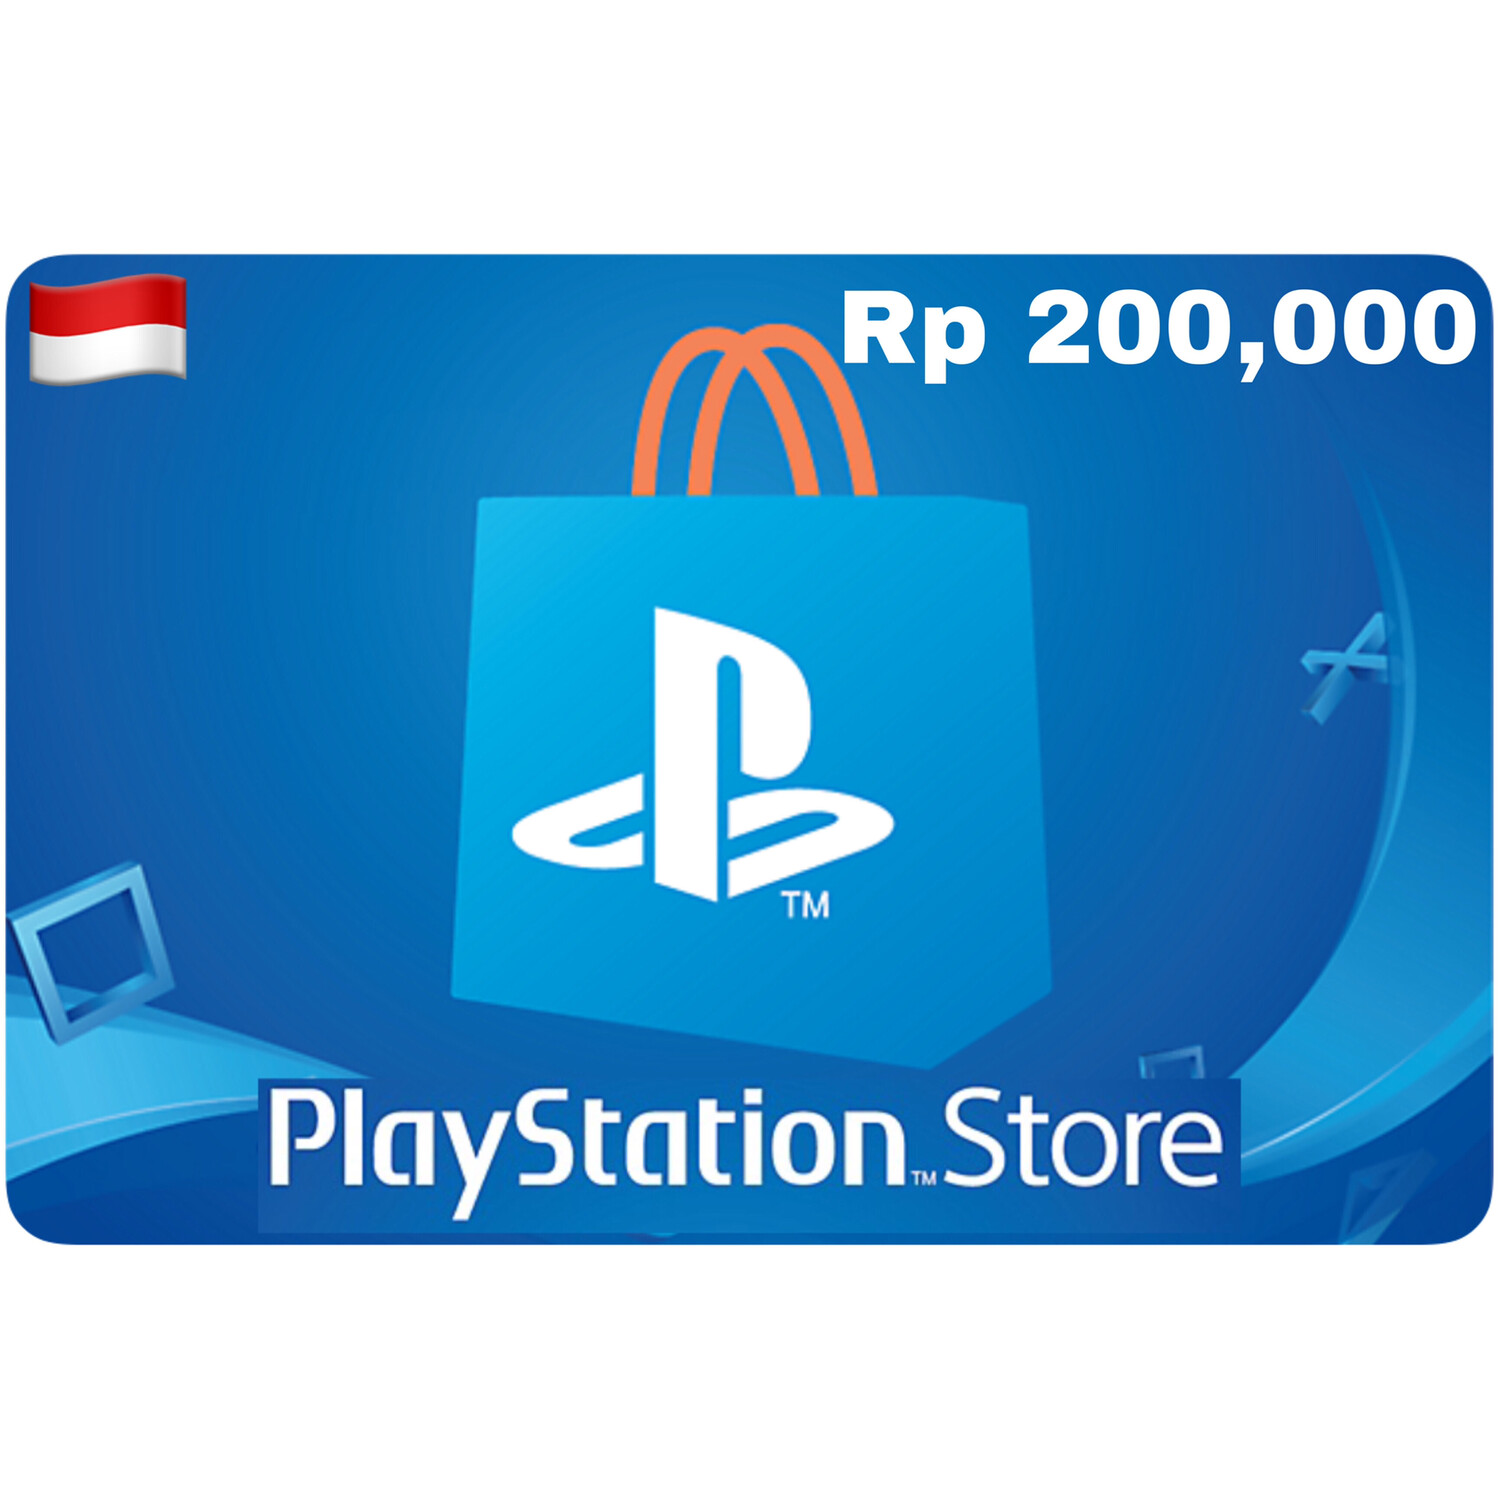 Playstation Store Gift Card Indonesia IDR 200,000